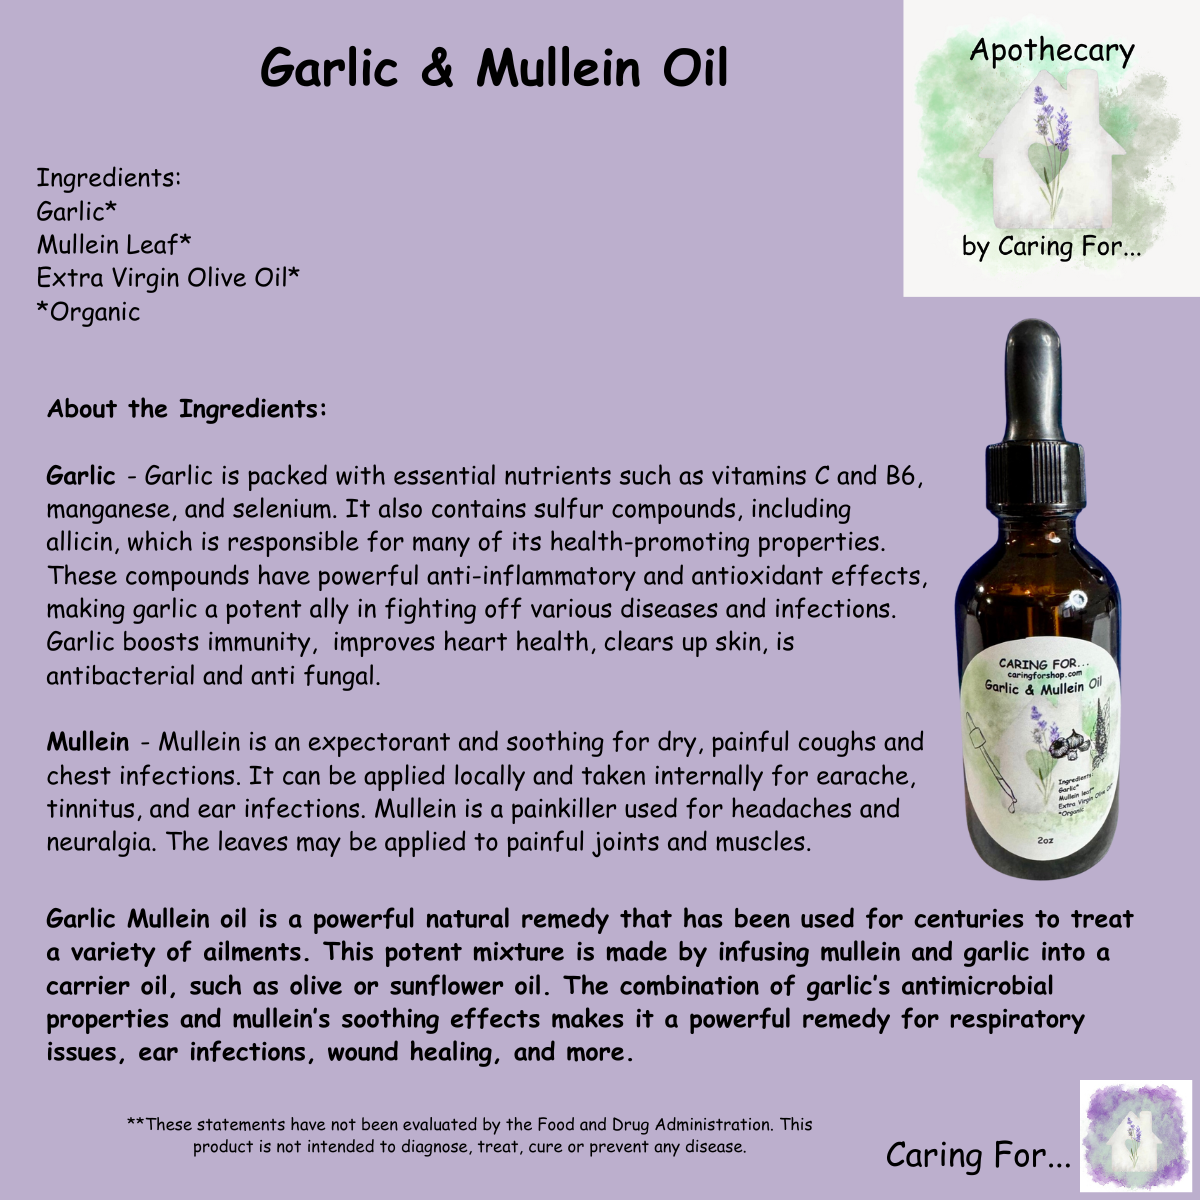 Garlic & Mullein Oil | 2oz | Earache Oil | Pain Relief Oil | Apothecary by Caring For...